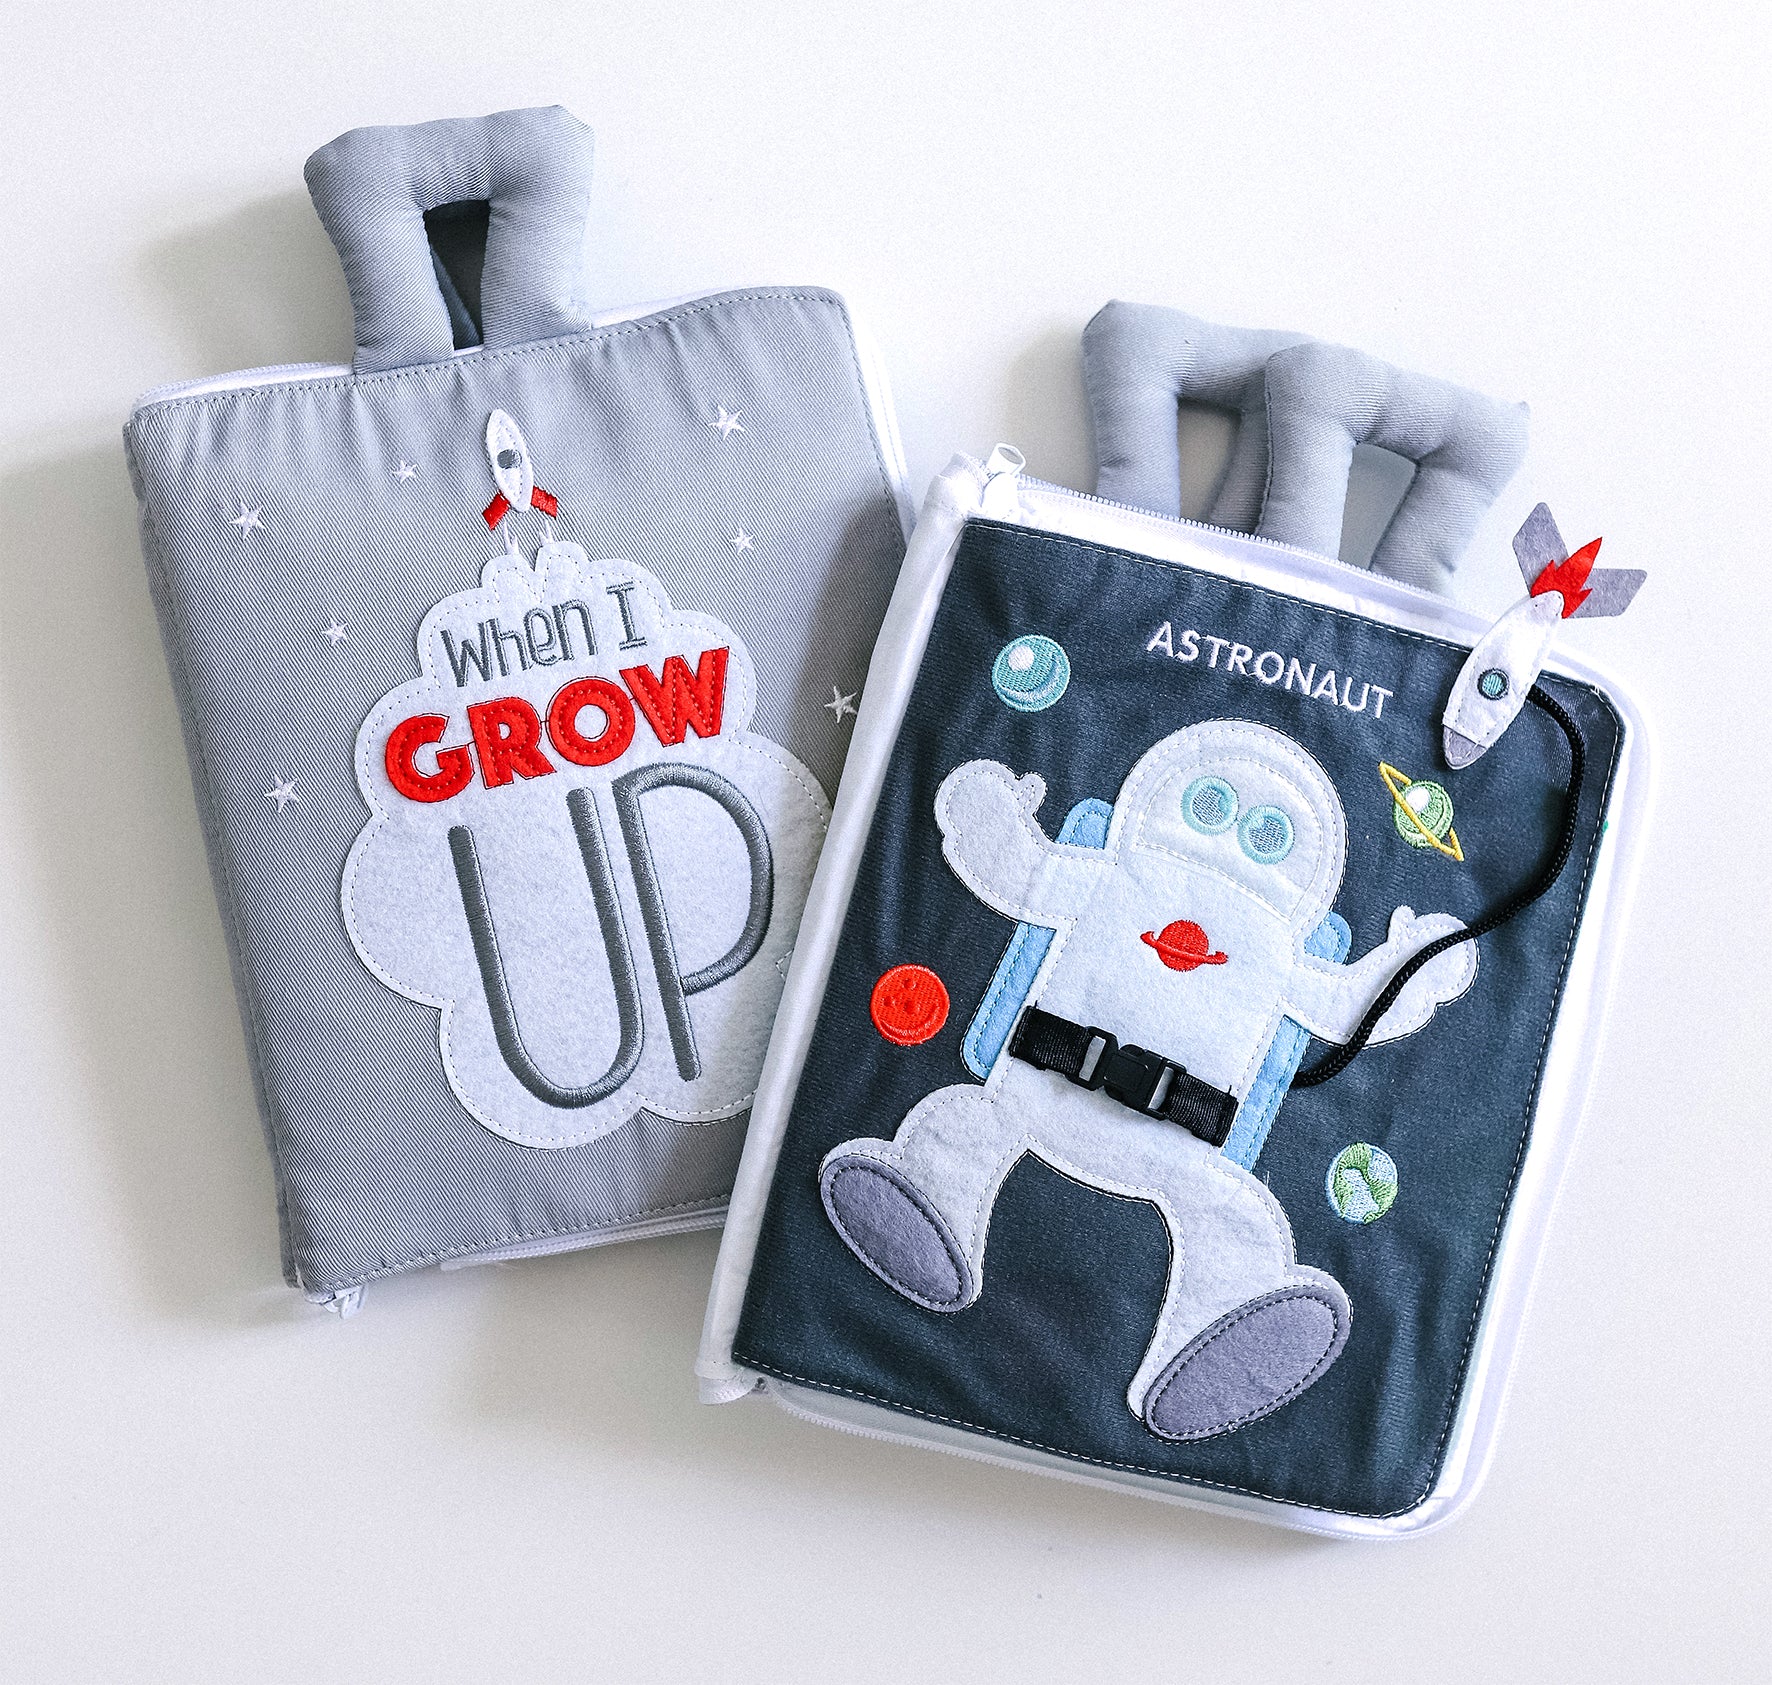 Fabric Activity Book - When I Grow Up